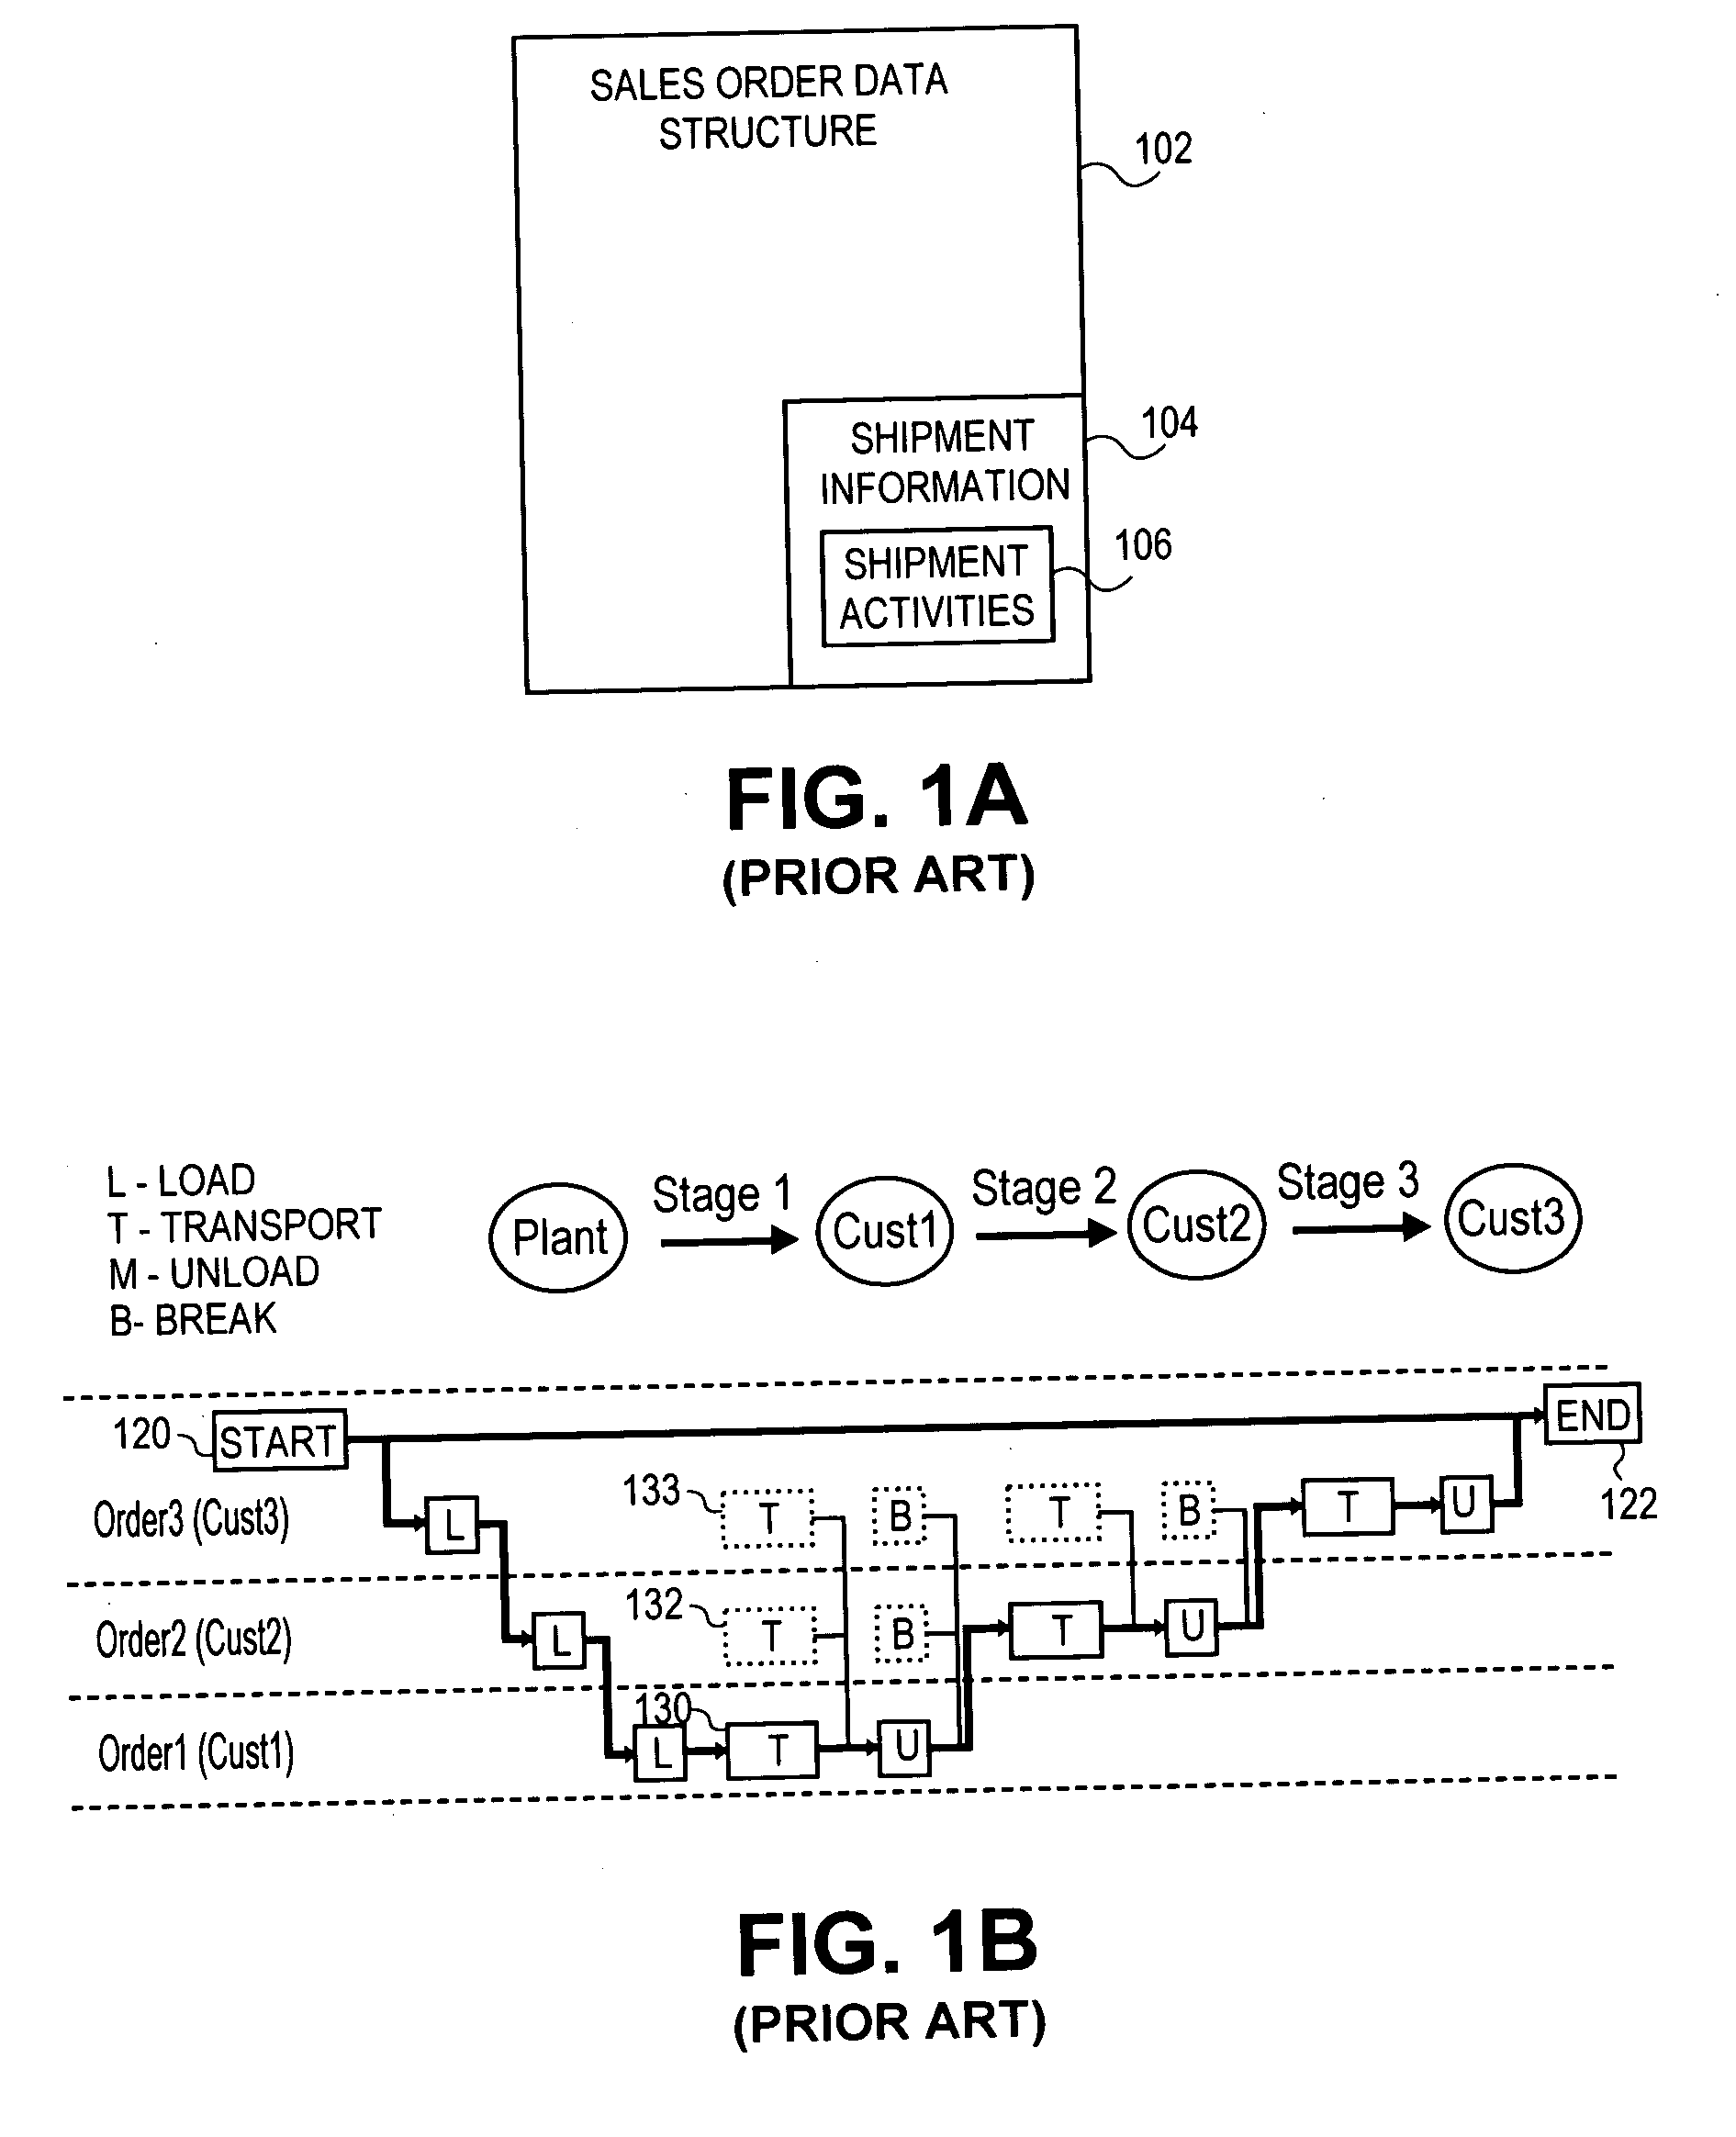 Method and system to model shipments for transportation planning/vehicle scheduling